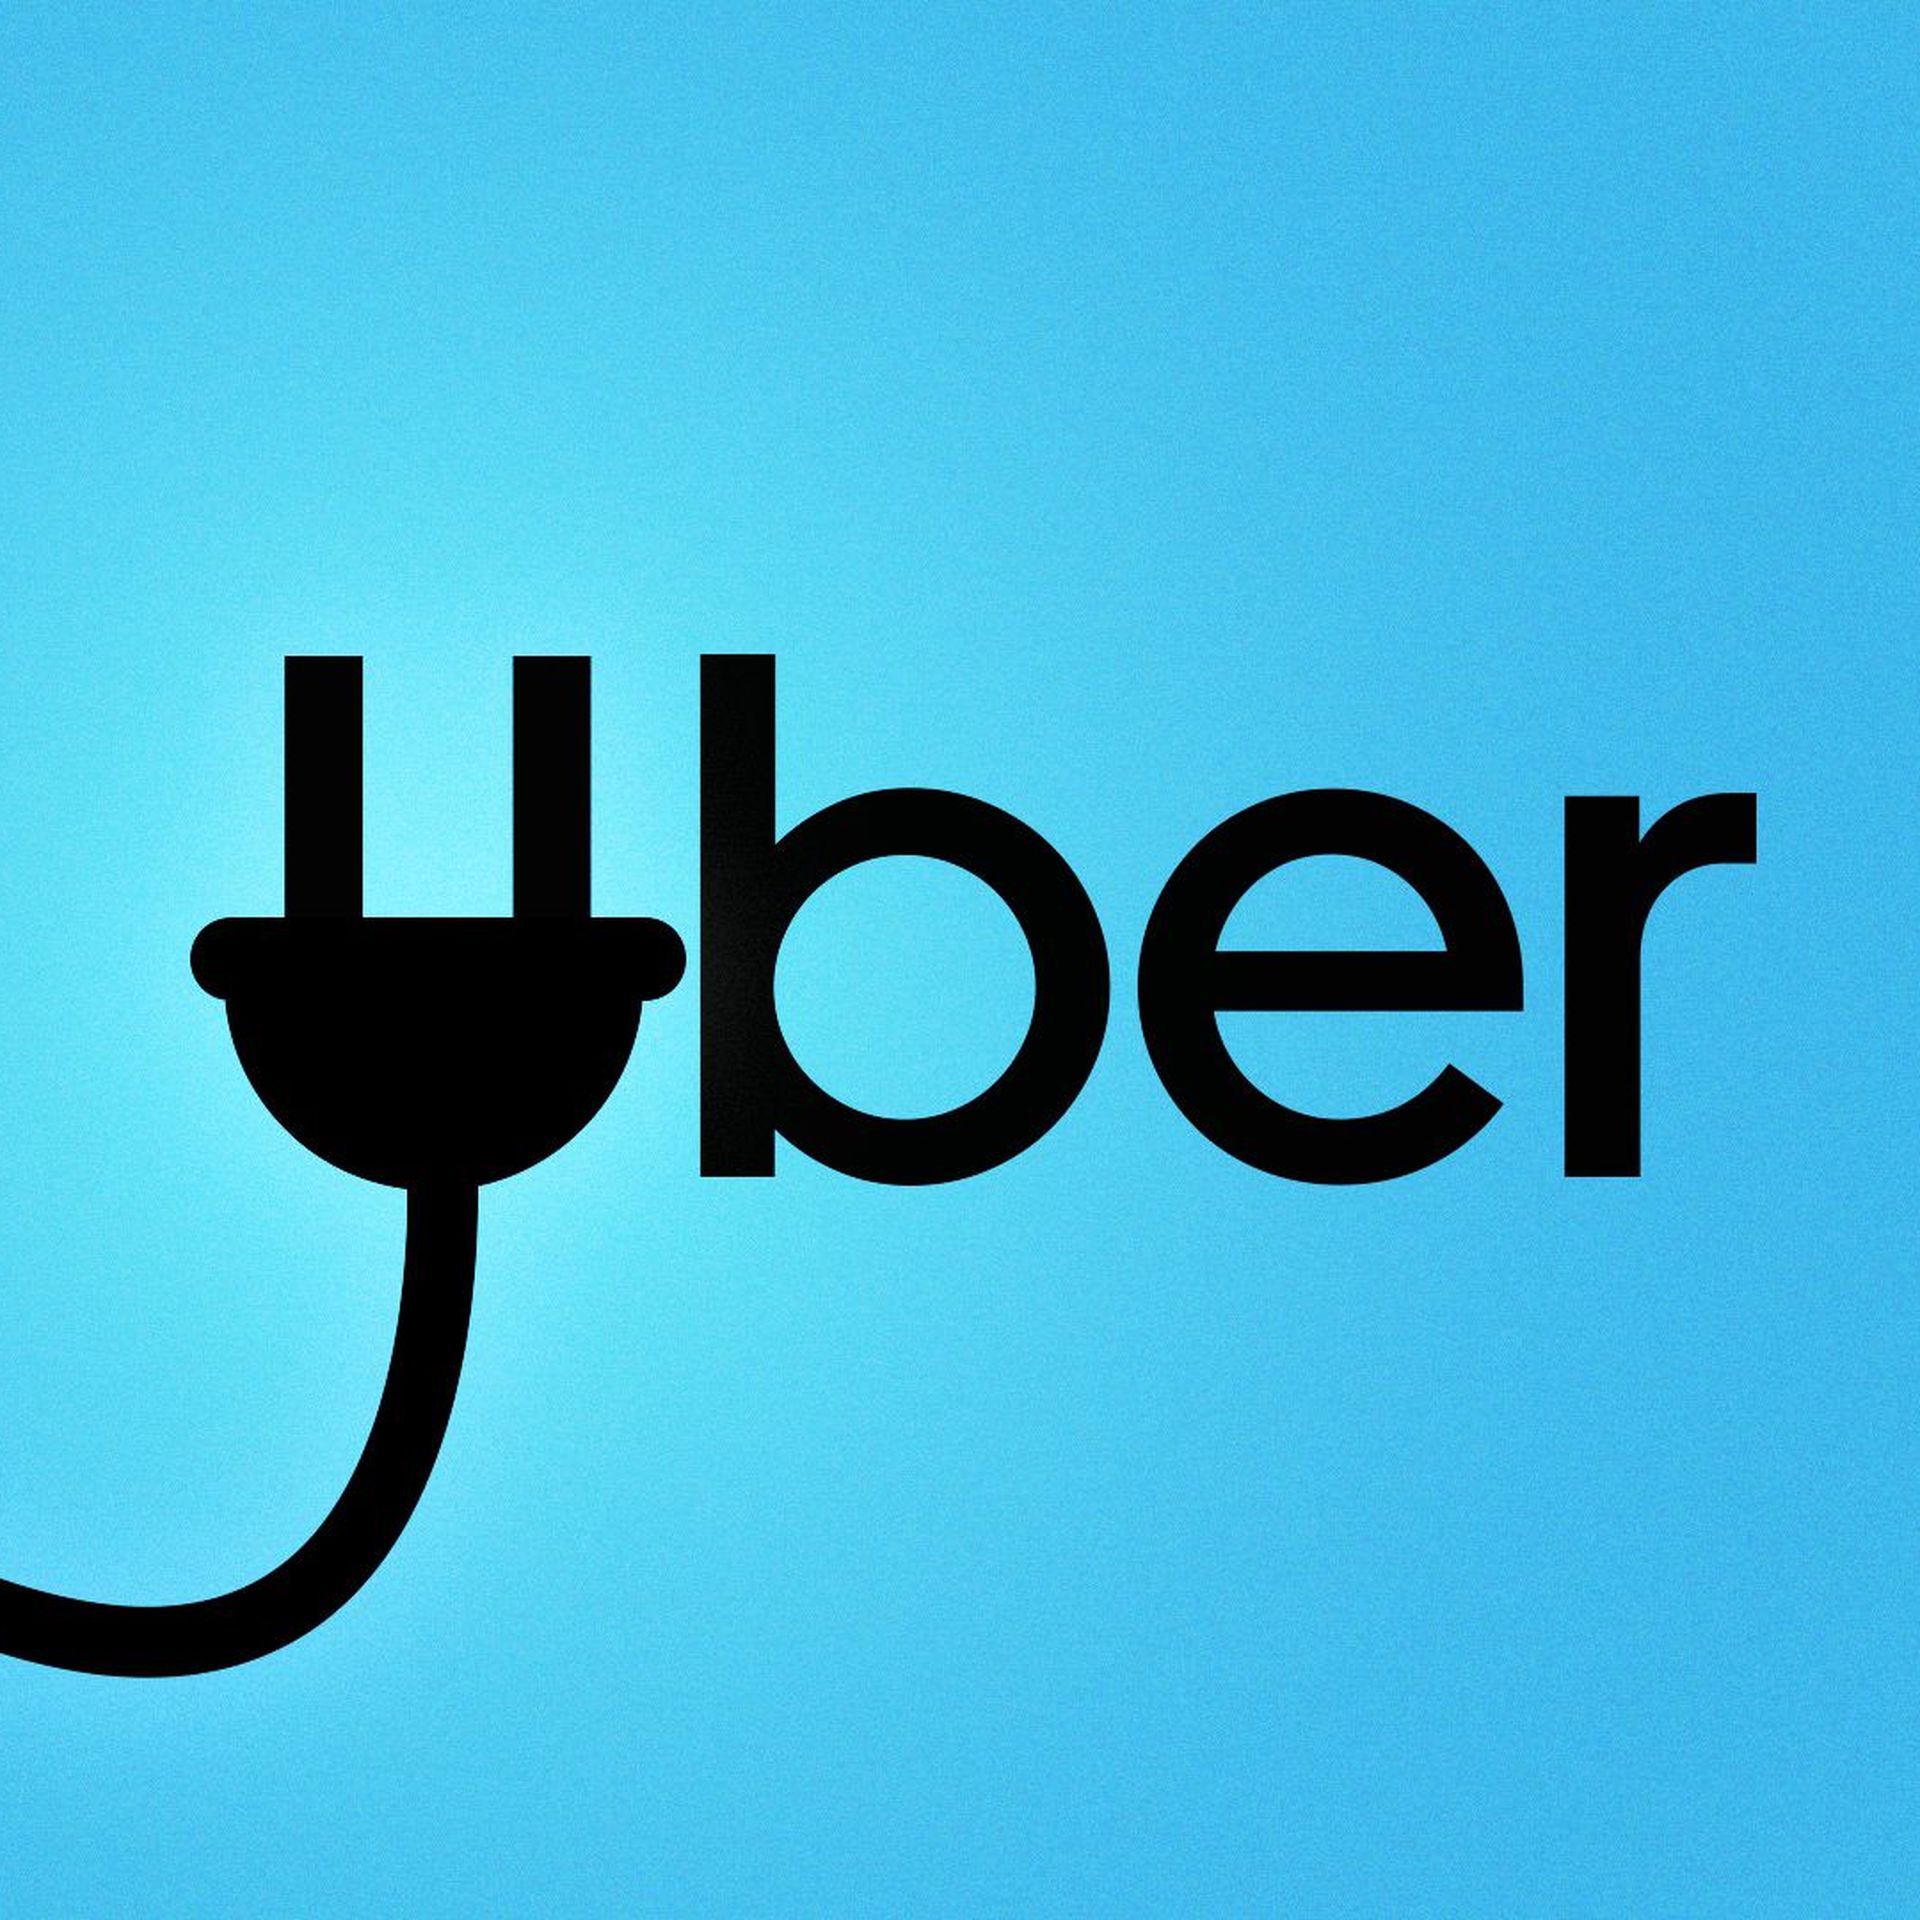 Illustration of the Uber logo with the image of a plug forming the "U."